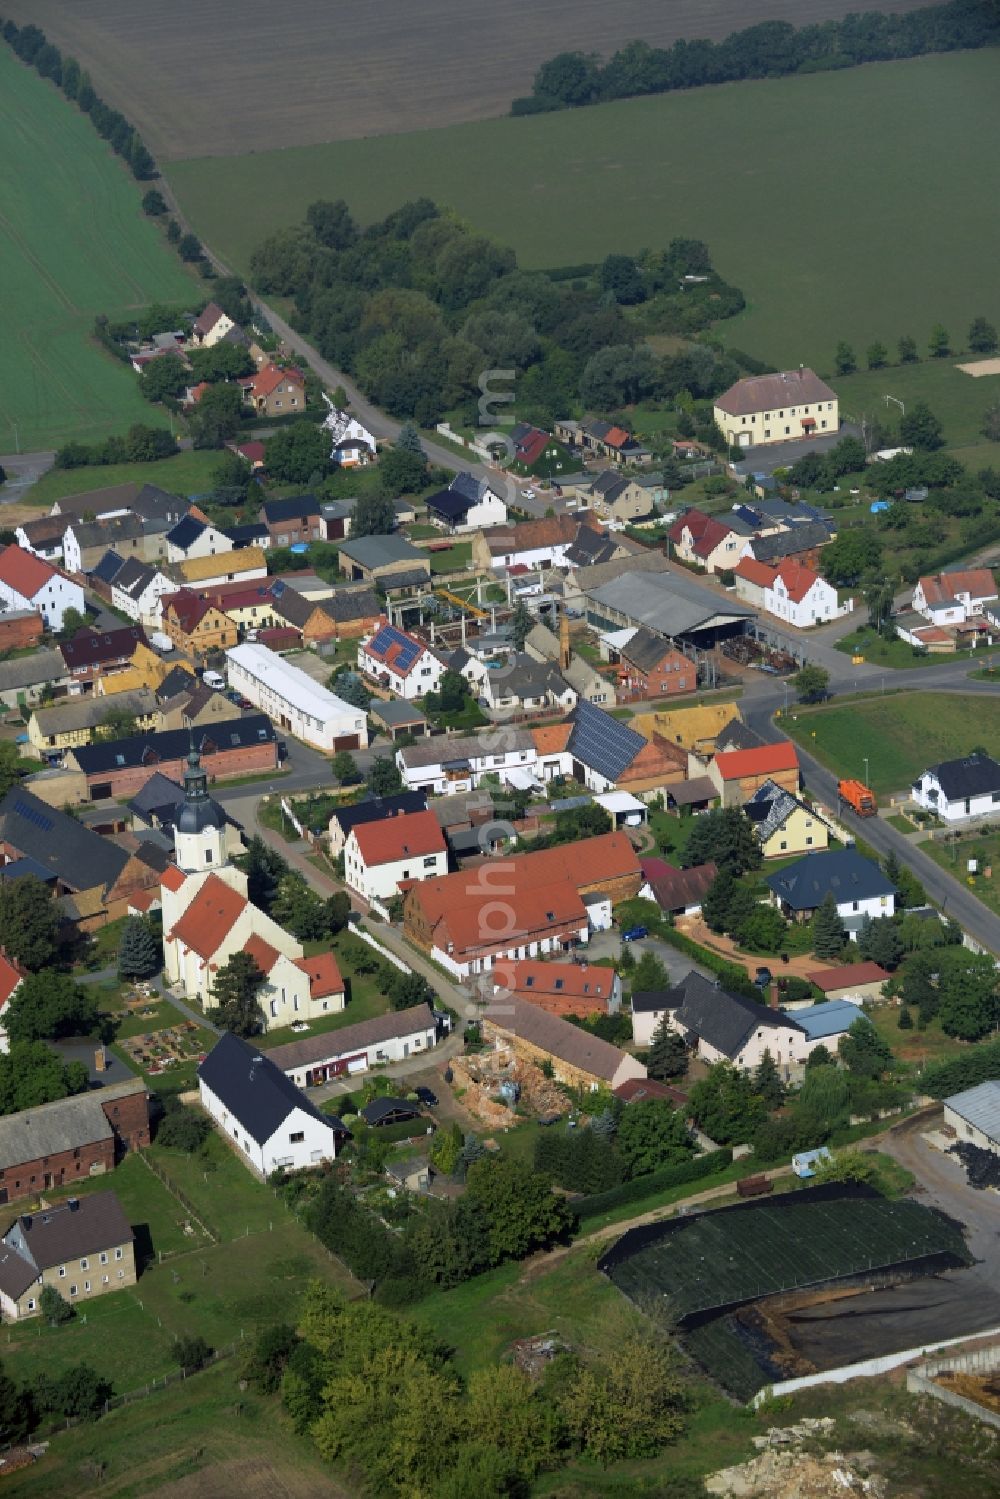 Aerial photograph Zschepplin - View of the Krippehna part of the borough of Zschepplin in the state of Saxony. The village is located in the county district of North Saxony and consists of farms and residential buildings